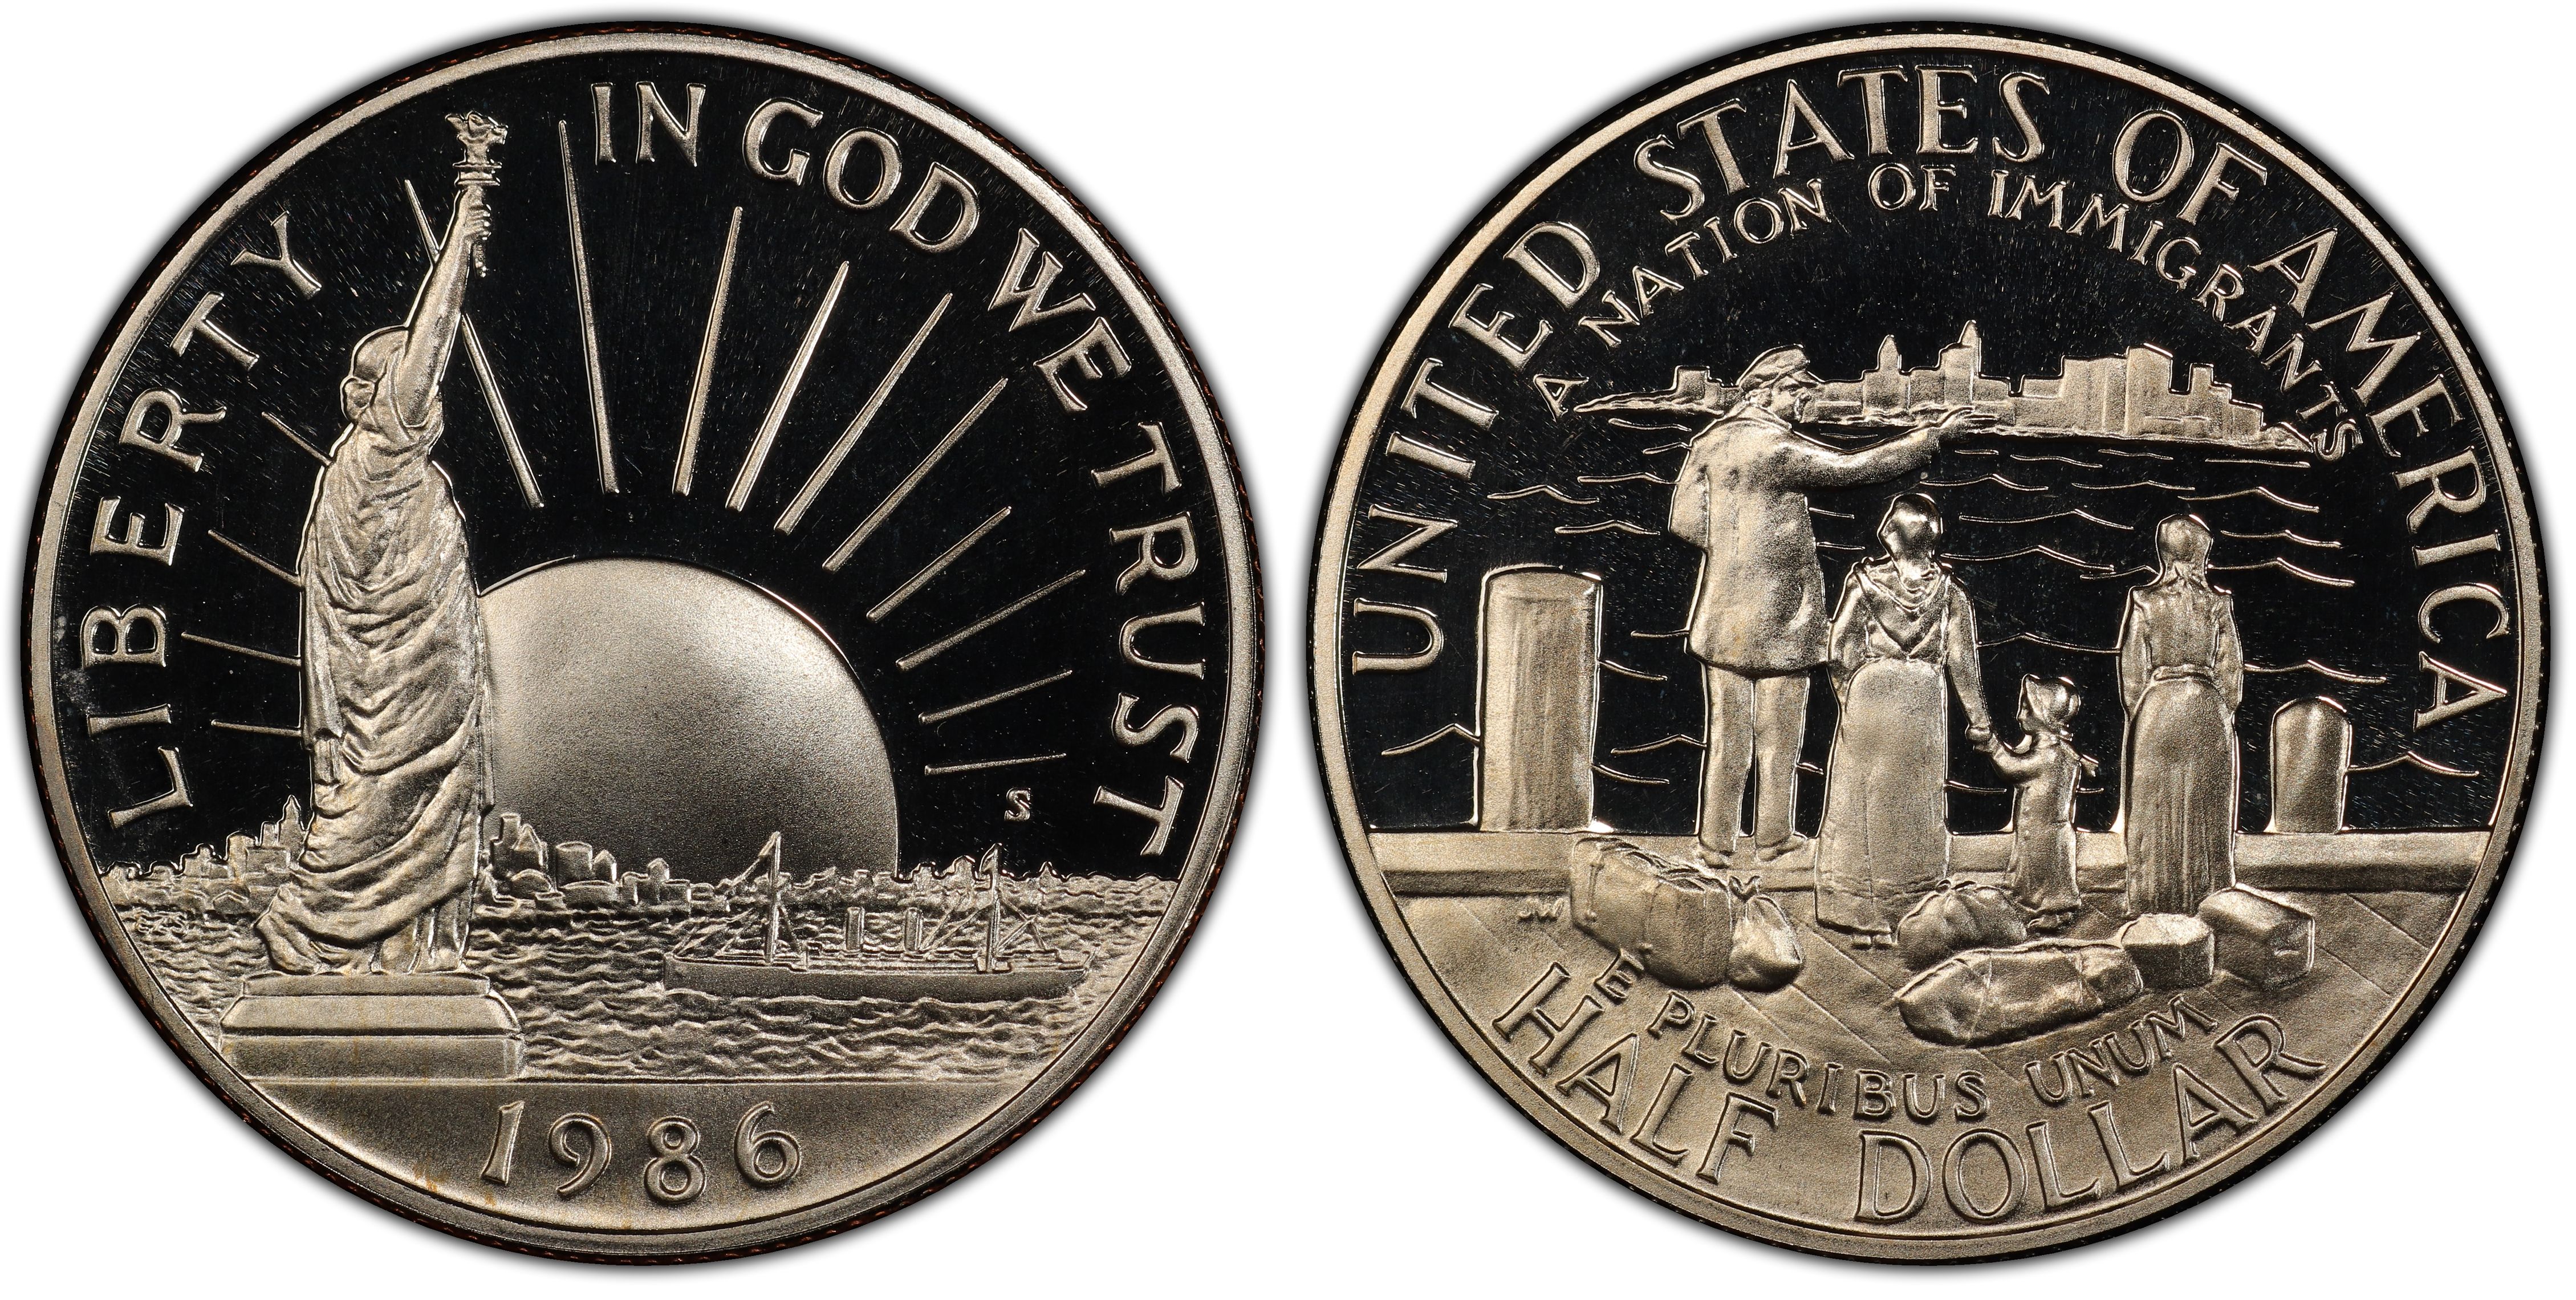 Proof Details about   1986 Statue of Liberty Half Dollar 